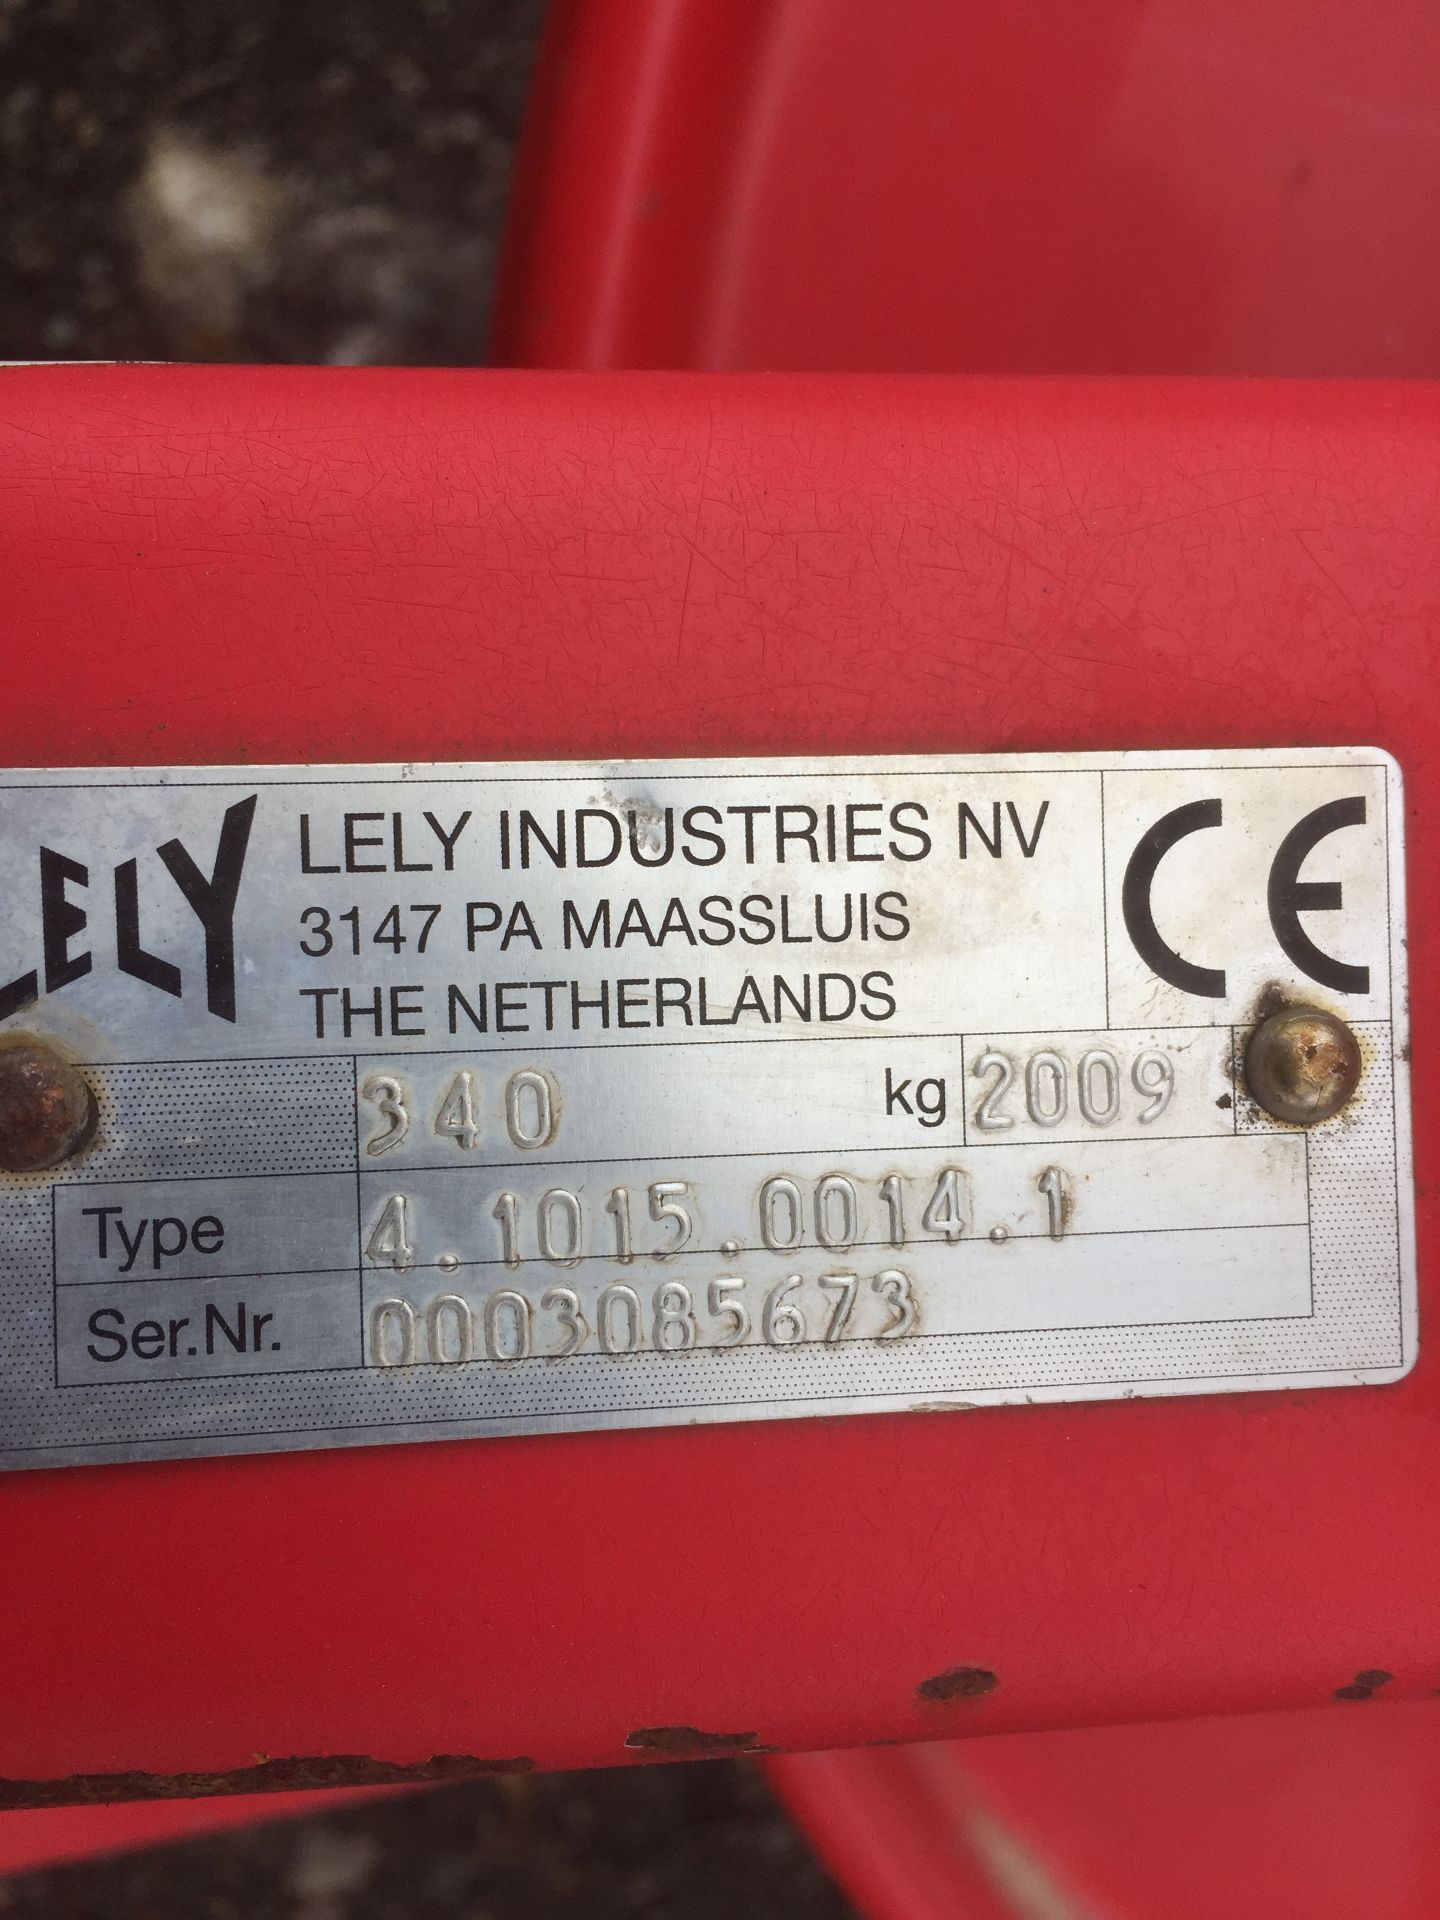 Lely Lotus 300 combi rig, Serial No. 0003085673 (2009) - Image 3 of 3